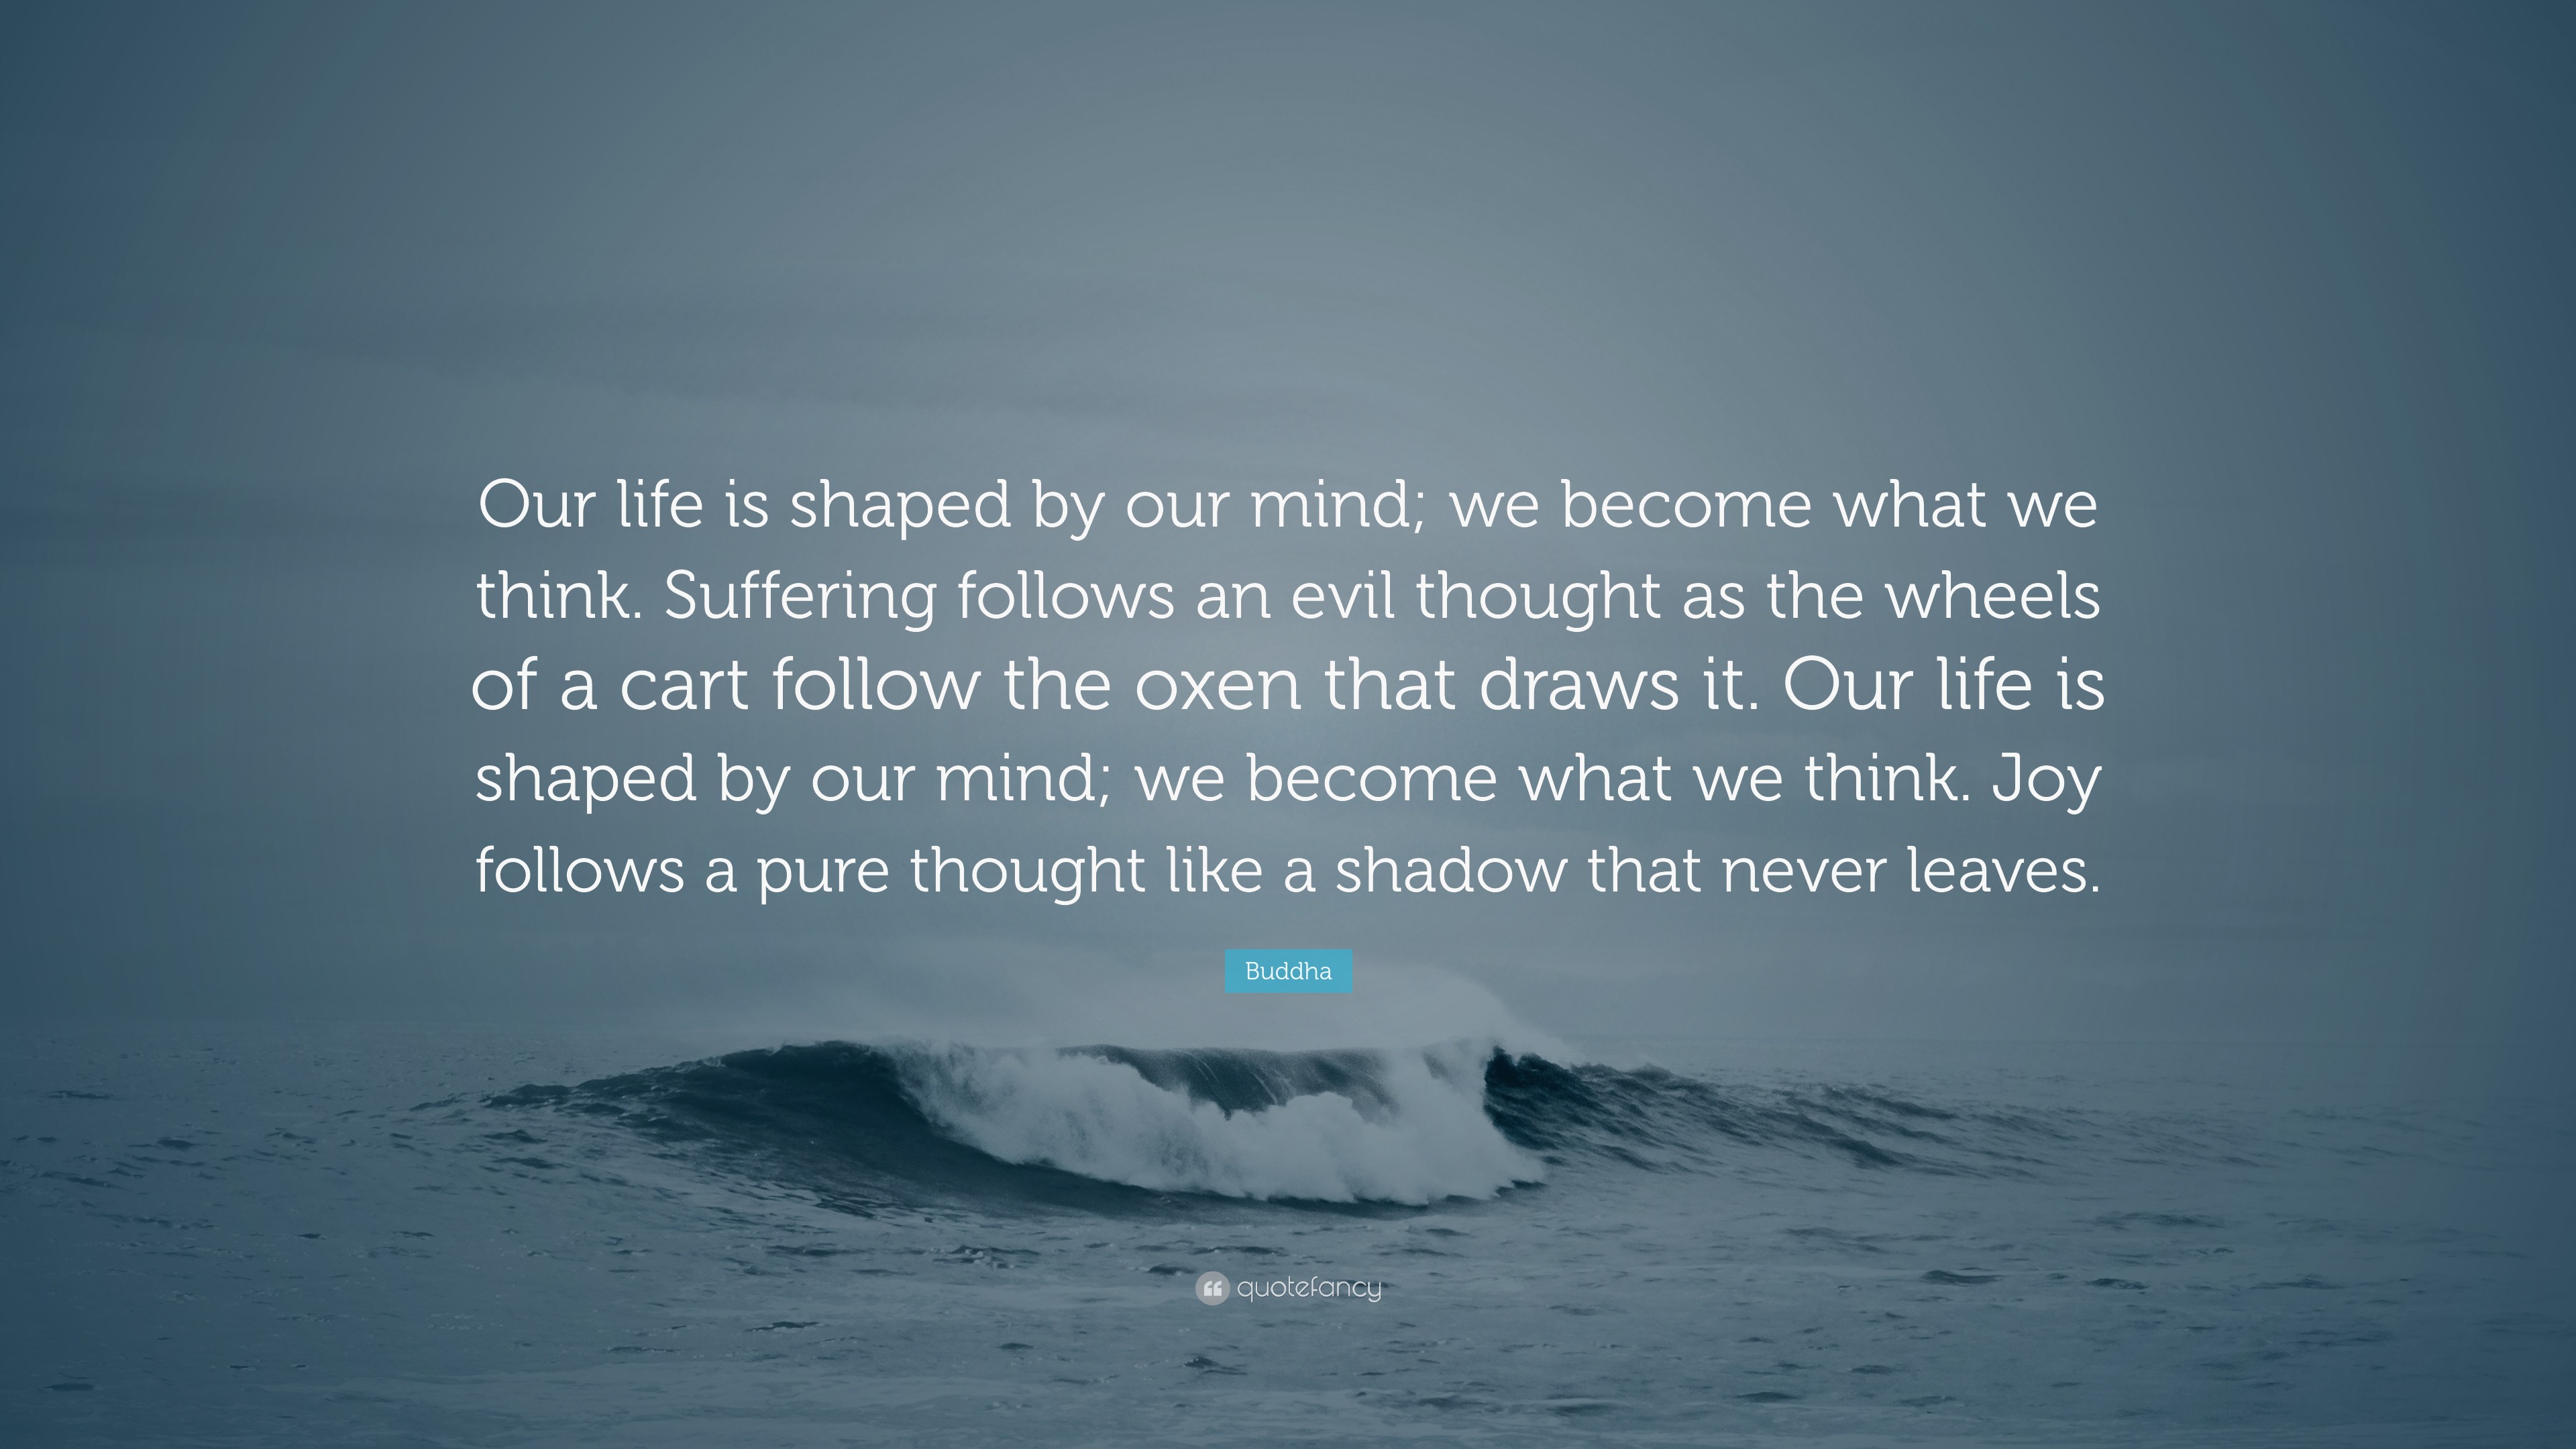 life quotes from buddha buddha quote u201cour life is shaped by our mind we be e what we